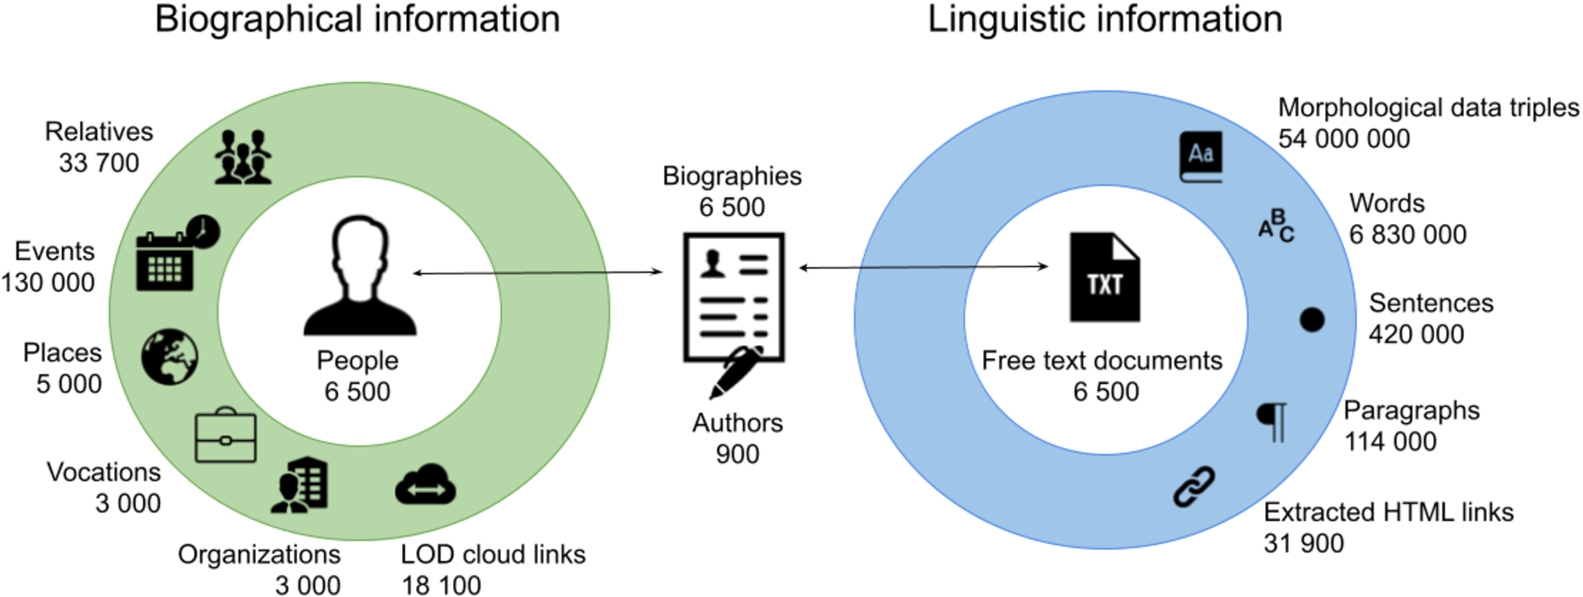 Amounts of extracted biographical and linguistic data.